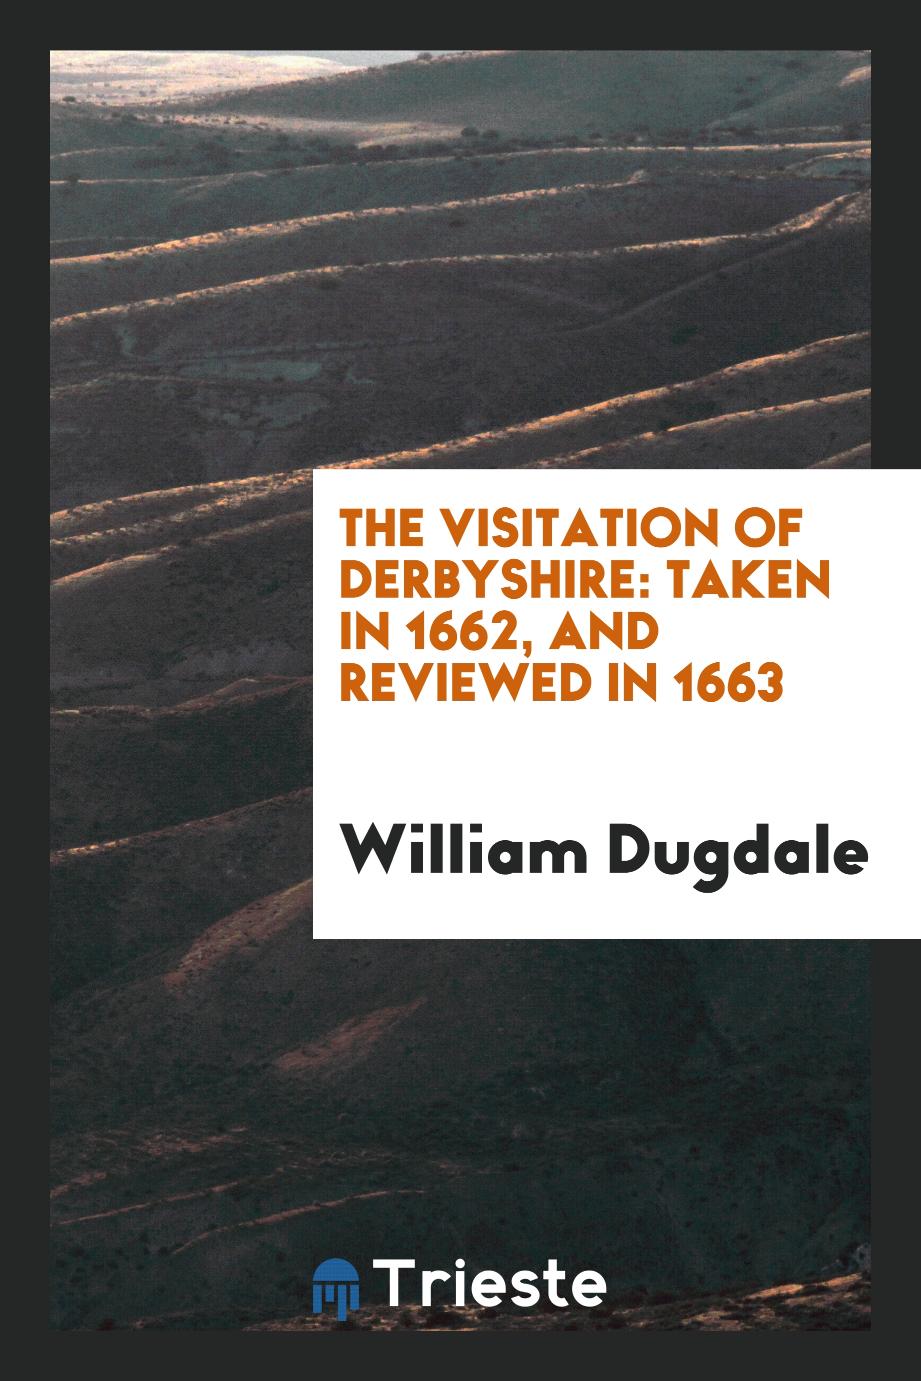 The Visitation of Derbyshire: Taken in 1662, and Reviewed in 1663